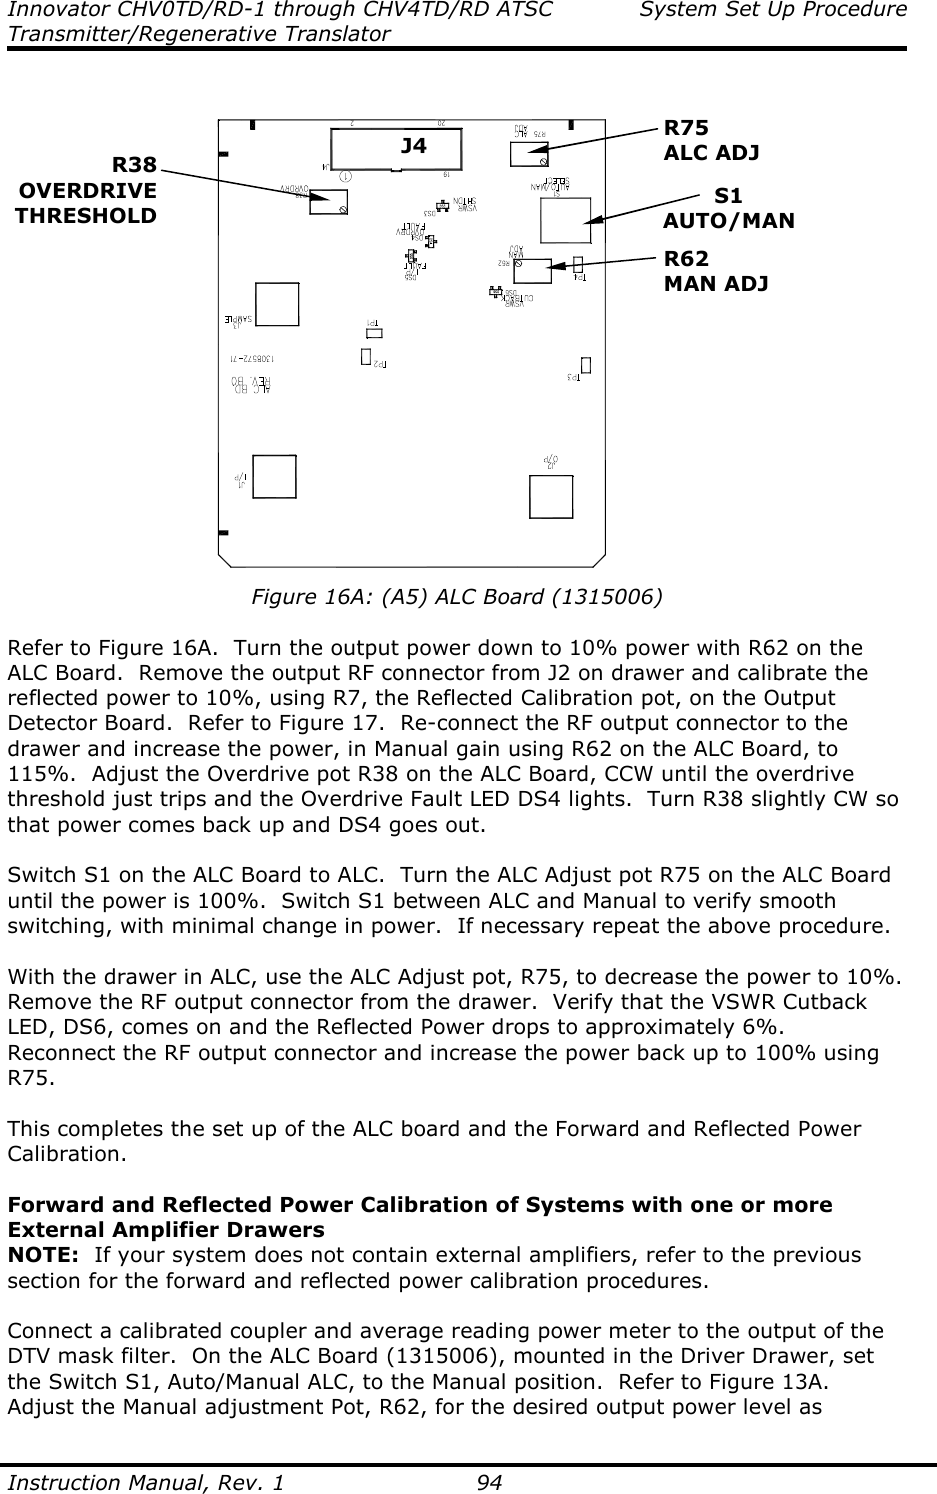 Innovator CHV0TD/RD-1 through CHV4TD/RD ATSC  System Set Up Procedure Transmitter/Regenerative Translator  Instruction Manual, Rev. 1    94   Figure 16A: (A5) ALC Board (1315006)  Refer to Figure 16A.  Turn the output power down to 10% power with R62 on the ALC Board.  Remove the output RF connector from J2 on drawer and calibrate the reflected power to 10%, using R7, the Reflected Calibration pot, on the Output Detector Board.  Refer to Figure 17.  Re-connect the RF output connector to the drawer and increase the power, in Manual gain using R62 on the ALC Board, to 115%.  Adjust the Overdrive pot R38 on the ALC Board, CCW until the overdrive threshold just trips and the Overdrive Fault LED DS4 lights.  Turn R38 slightly CW so that power comes back up and DS4 goes out.  Switch S1 on the ALC Board to ALC.  Turn the ALC Adjust pot R75 on the ALC Board until the power is 100%.  Switch S1 between ALC and Manual to verify smooth switching, with minimal change in power.  If necessary repeat the above procedure.  With the drawer in ALC, use the ALC Adjust pot, R75, to decrease the power to 10%.  Remove the RF output connector from the drawer.  Verify that the VSWR Cutback LED, DS6, comes on and the Reflected Power drops to approximately 6%.  Reconnect the RF output connector and increase the power back up to 100% using R75.  This completes the set up of the ALC board and the Forward and Reflected Power Calibration.  Forward and Reflected Power Calibration of Systems with one or more External Amplifier Drawers NOTE:  If your system does not contain external amplifiers, refer to the previous section for the forward and reflected power calibration procedures.  Connect a calibrated coupler and average reading power meter to the output of the DTV mask filter.  On the ALC Board (1315006), mounted in the Driver Drawer, set the Switch S1, Auto/Manual ALC, to the Manual position.  Refer to Figure 13A.  Adjust the Manual adjustment Pot, R62, for the desired output power level as R38 OVERDRIVE THRESHOLD S1 AUTO/MAN R75 ALC ADJ R62 MAN ADJ J4 